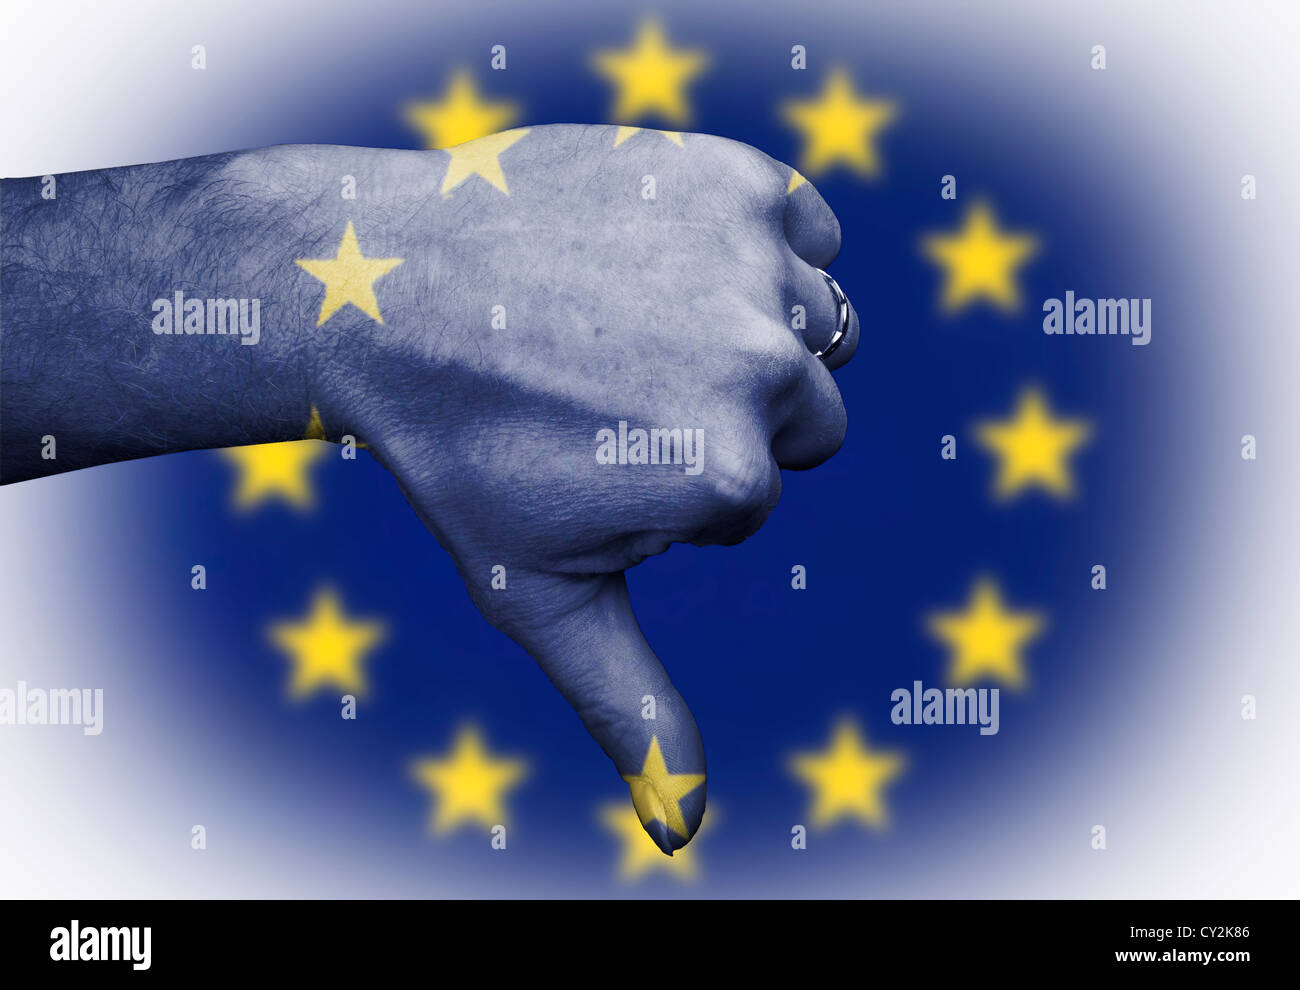 Thumbs down to the Europeans EU, sporting metaphor in rugby football all national sports team and derogatory slur on its people Stock Photo